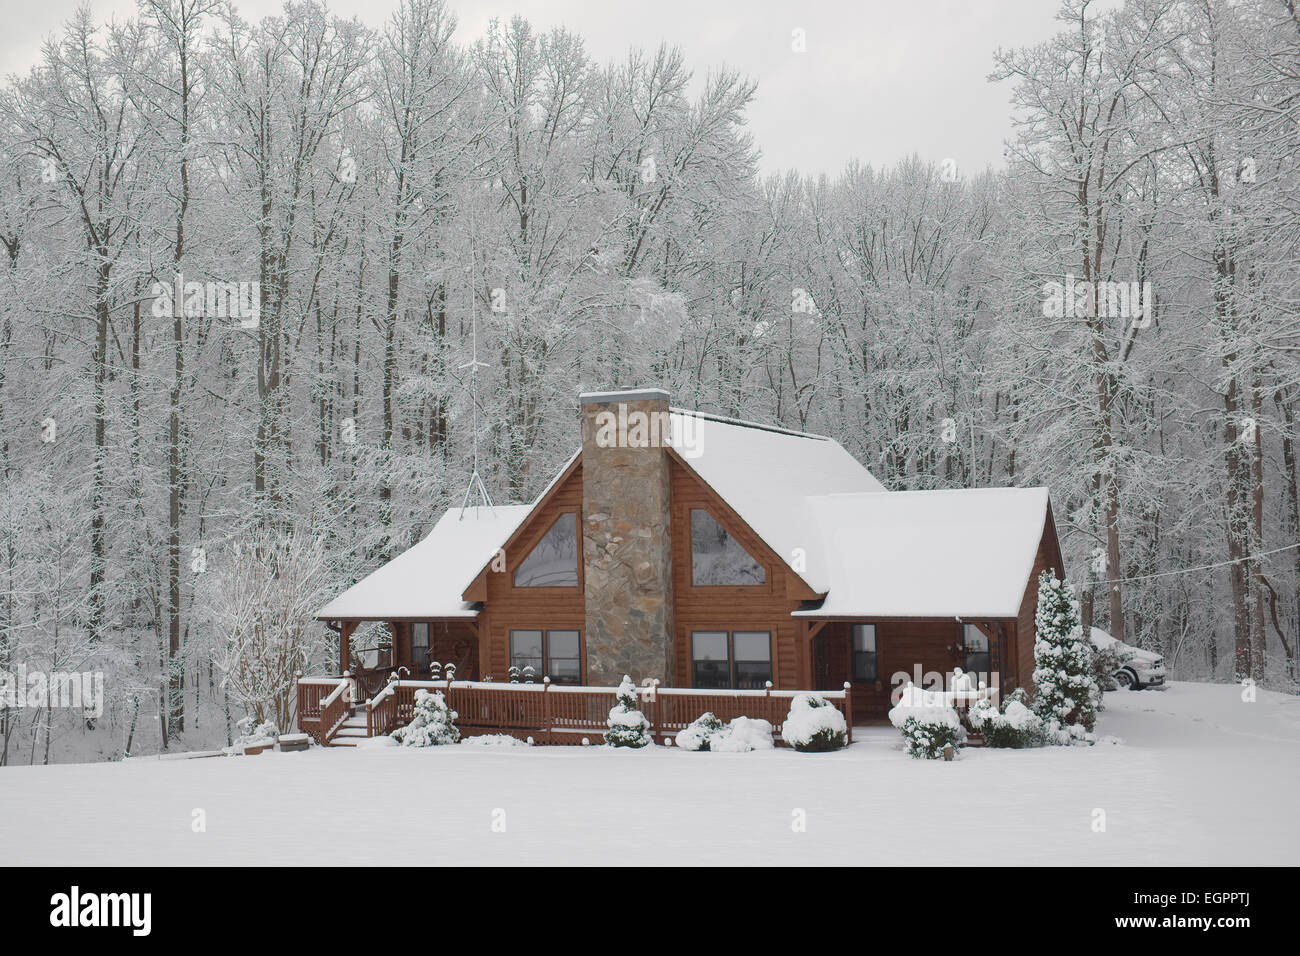 Snow covered log home in North Carolina. Surrounded by trees. Stock Photo